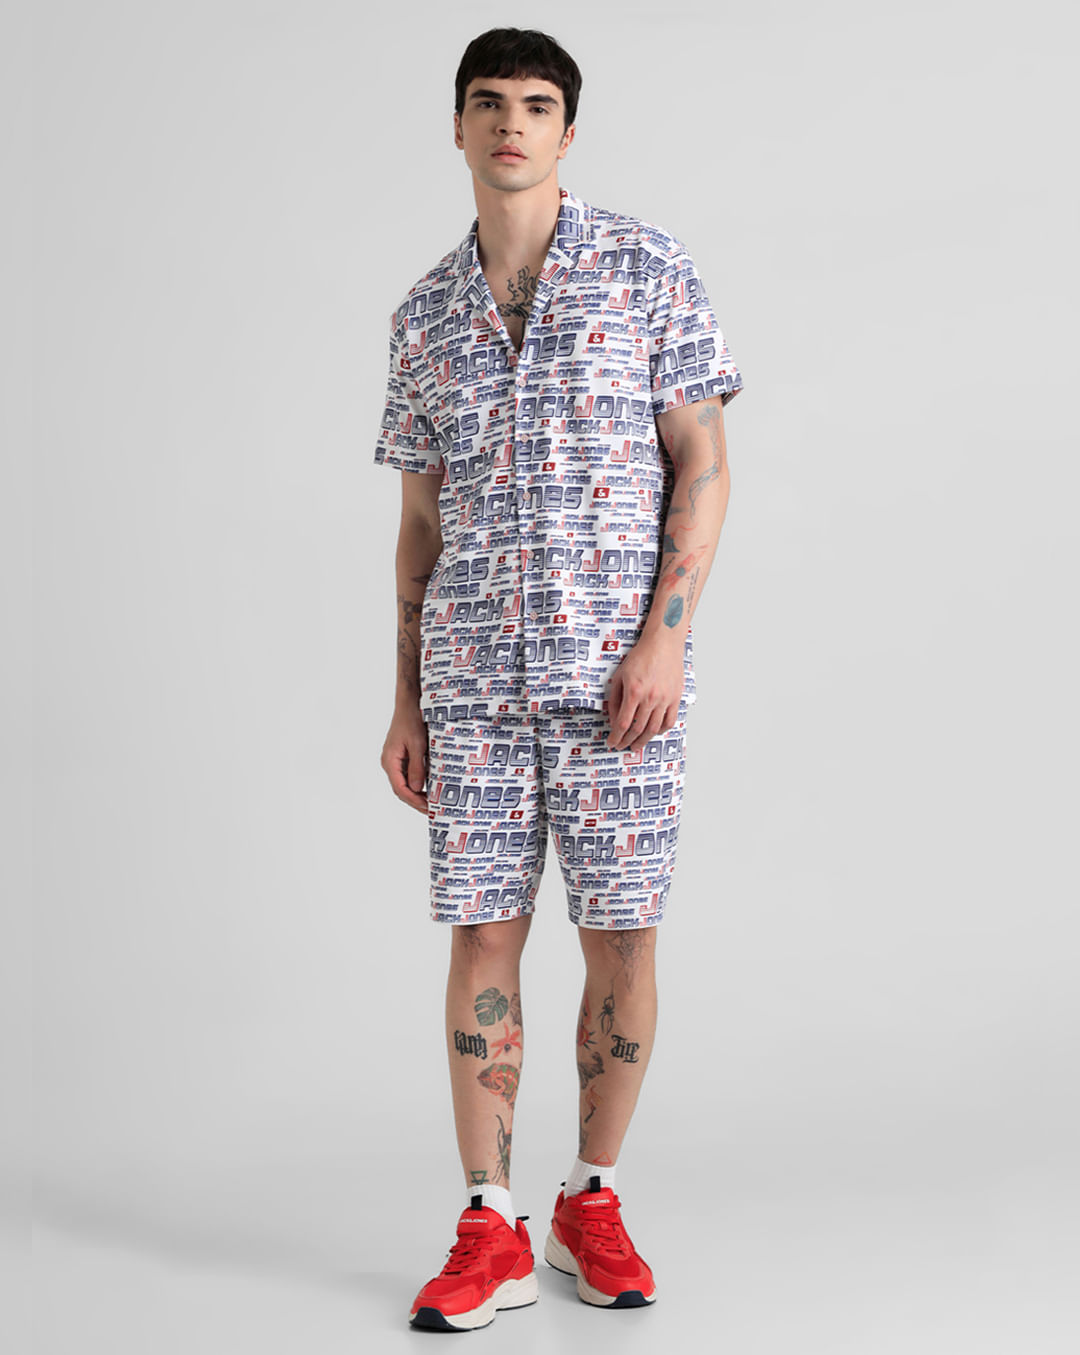 URBAN RACERS by JACK&JONES WHITE LOW RISE PRINTED SHORTS|263085901